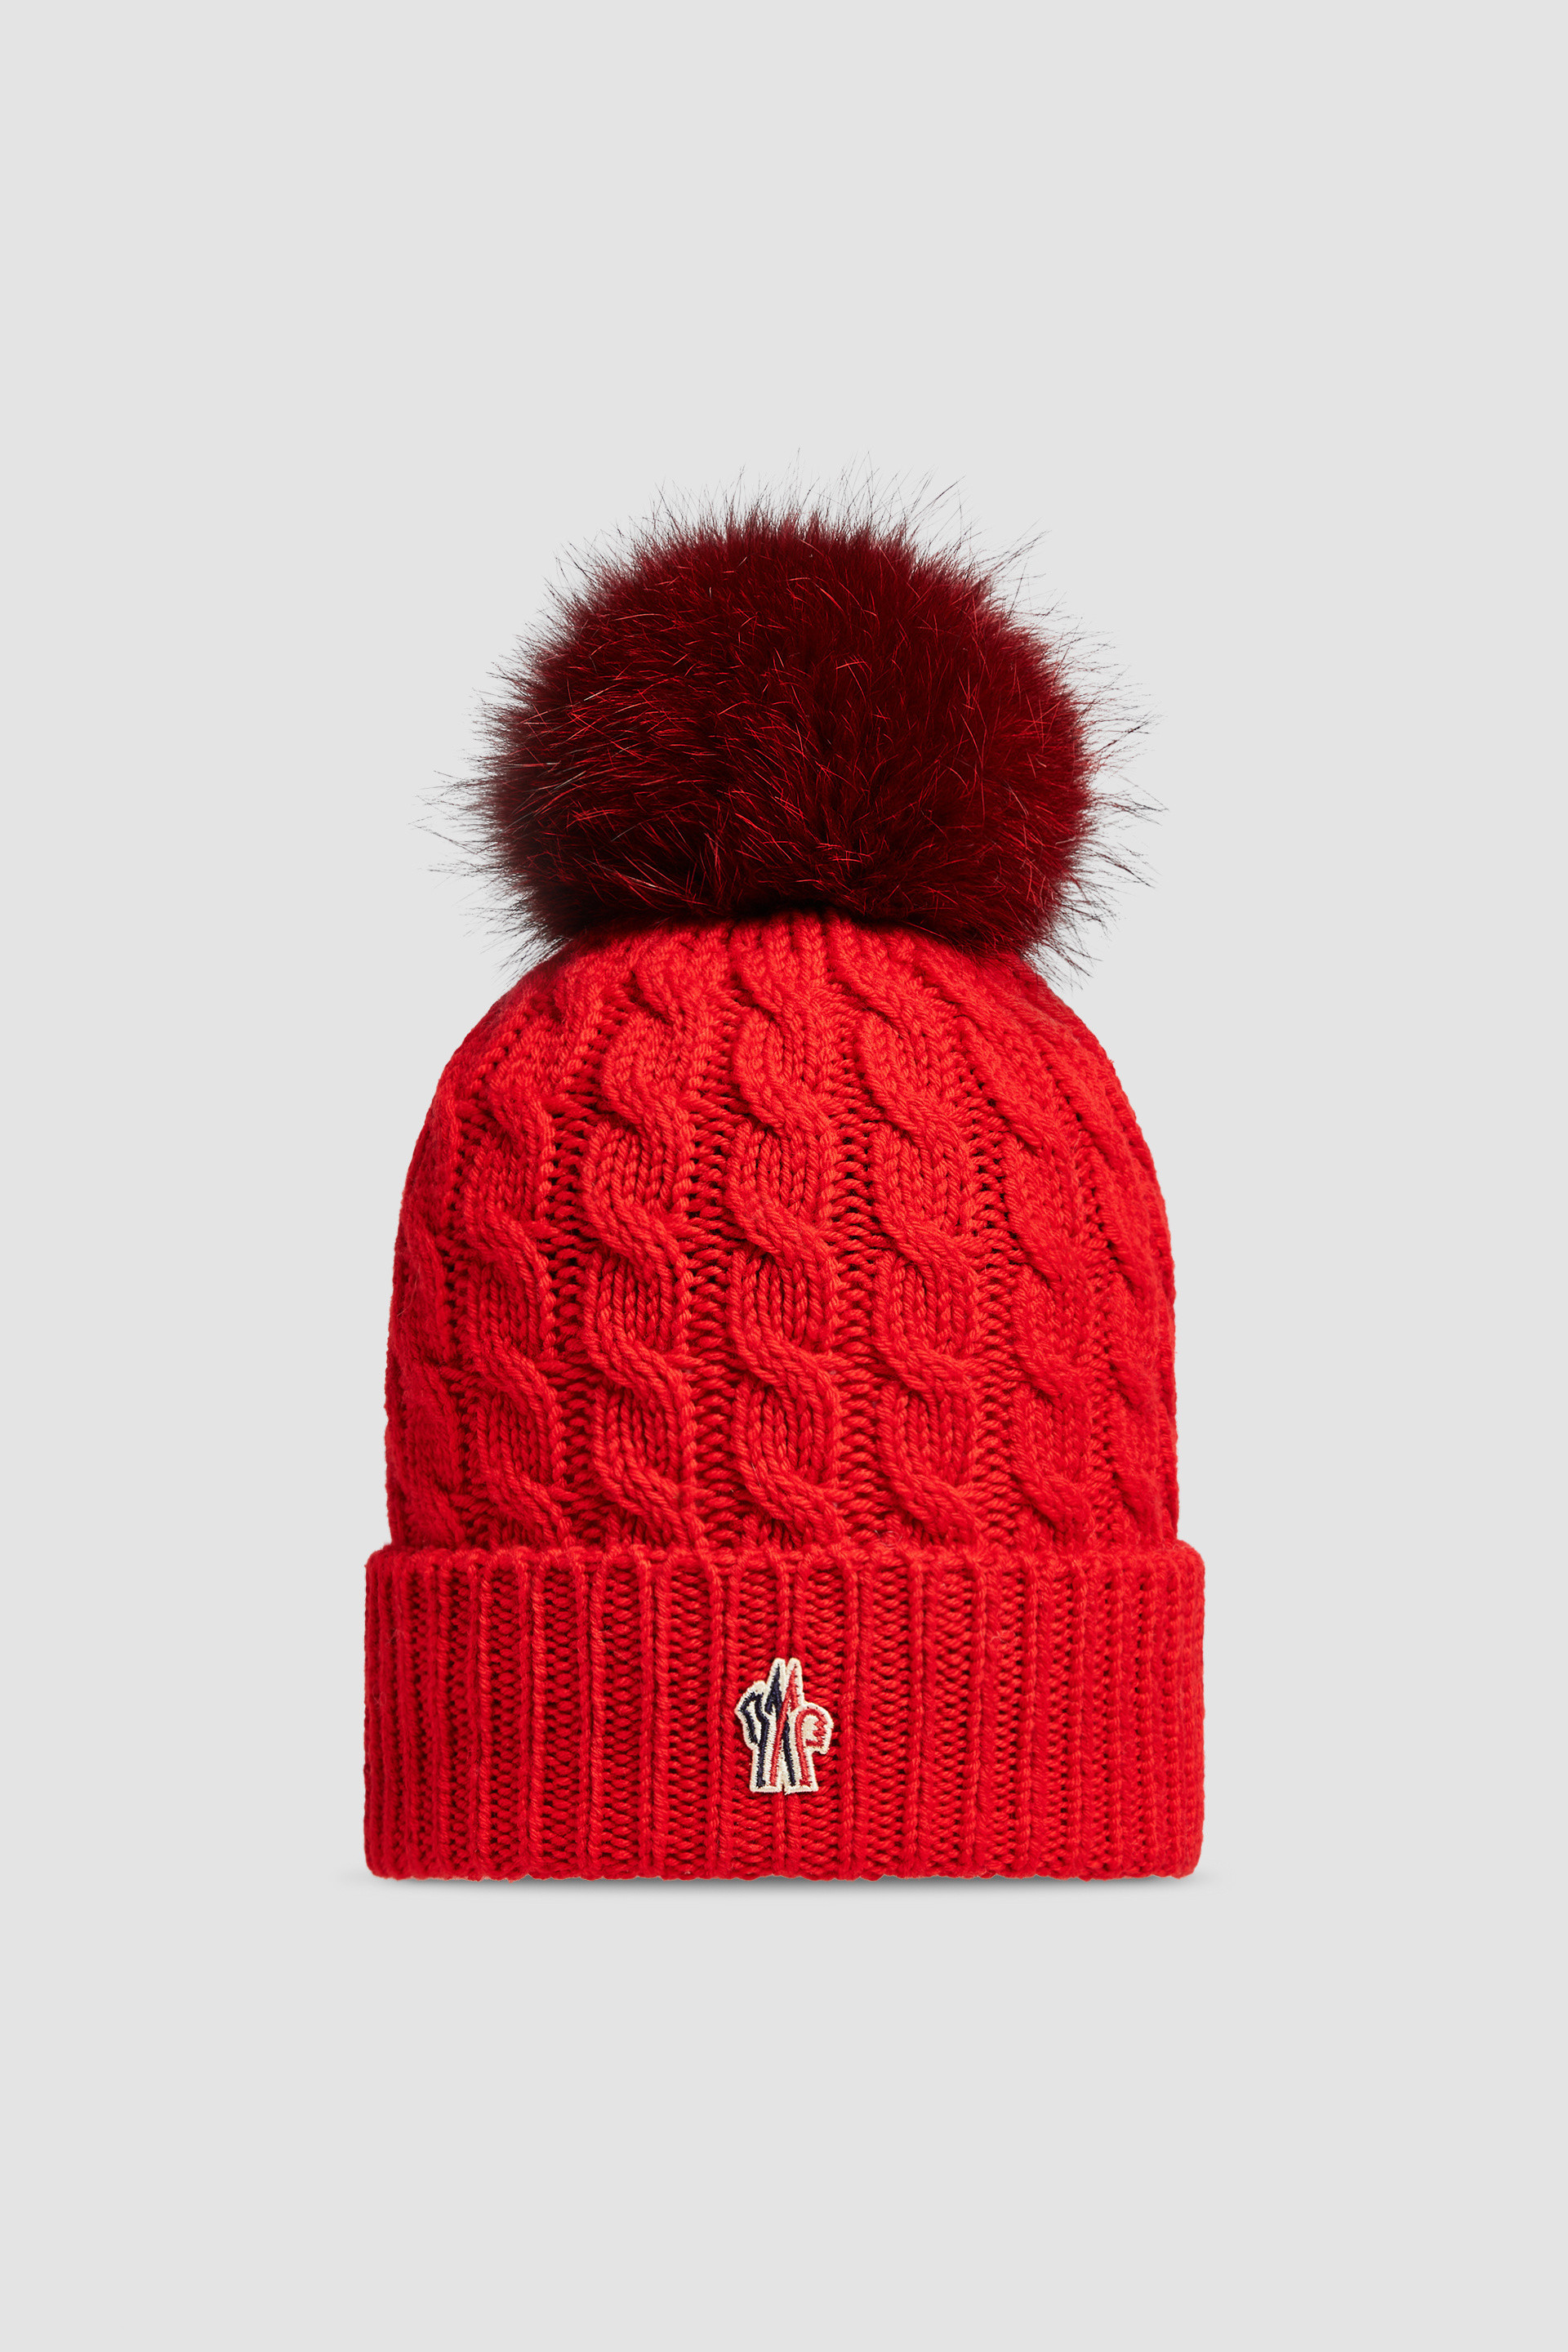 NEW MONCLER BRIGHT CORAL WOOL POM POM BEANIE LOGO HAT ONE SIZE RFID CODE